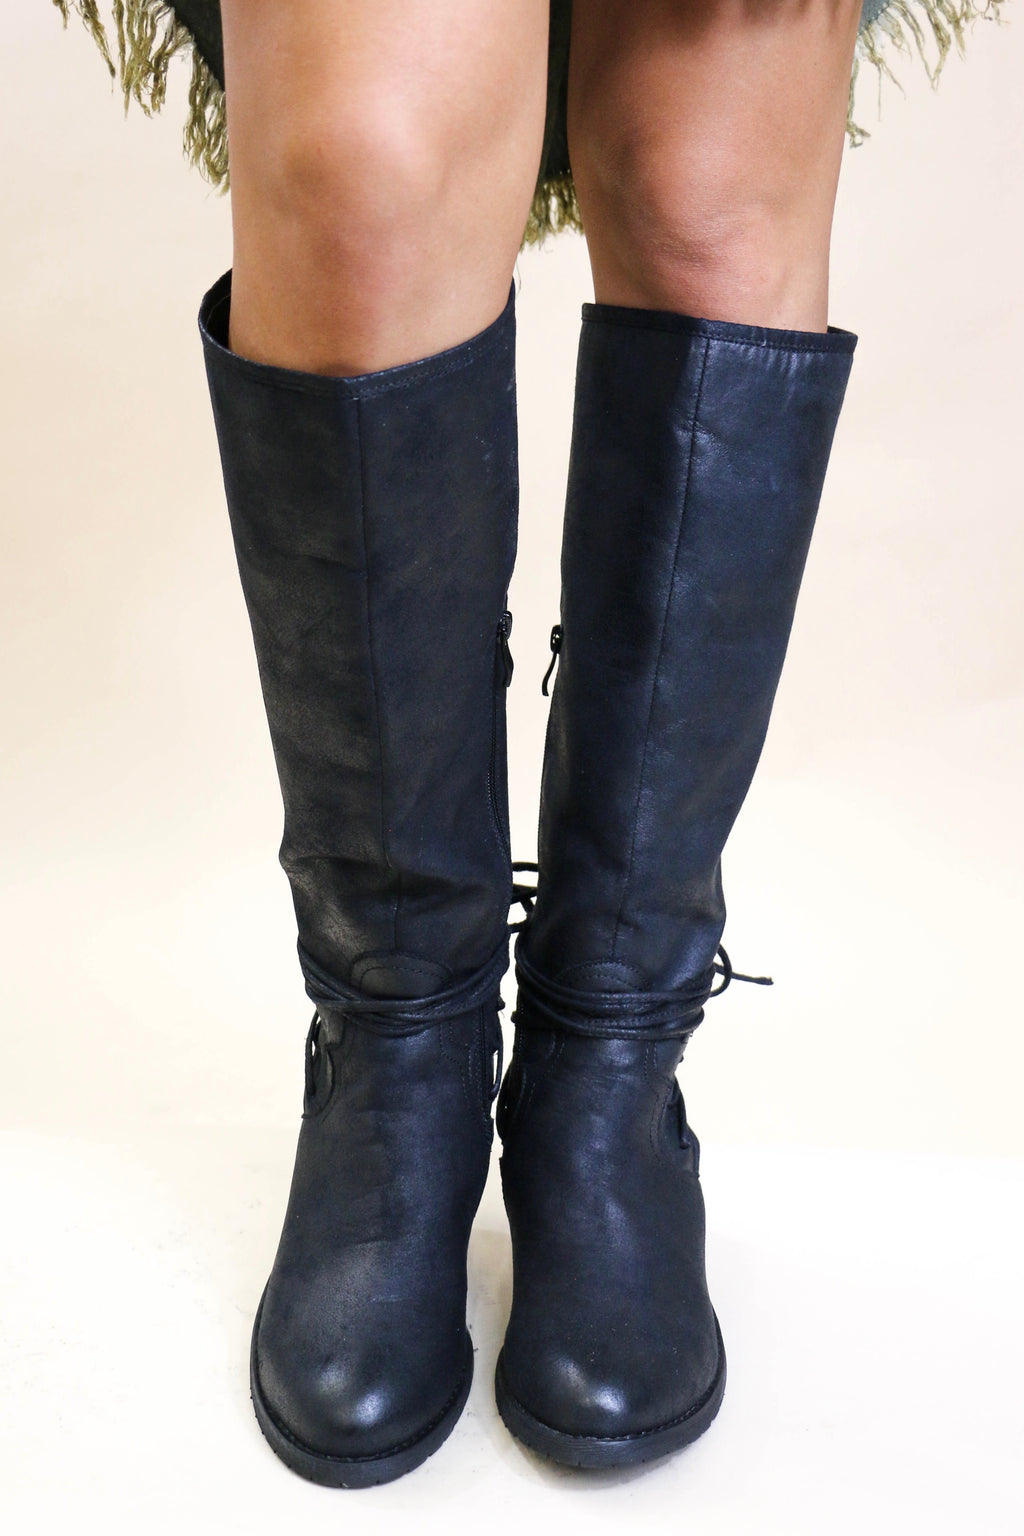 Very Volatile Lace Up Tall Black Boots with Camo Accent